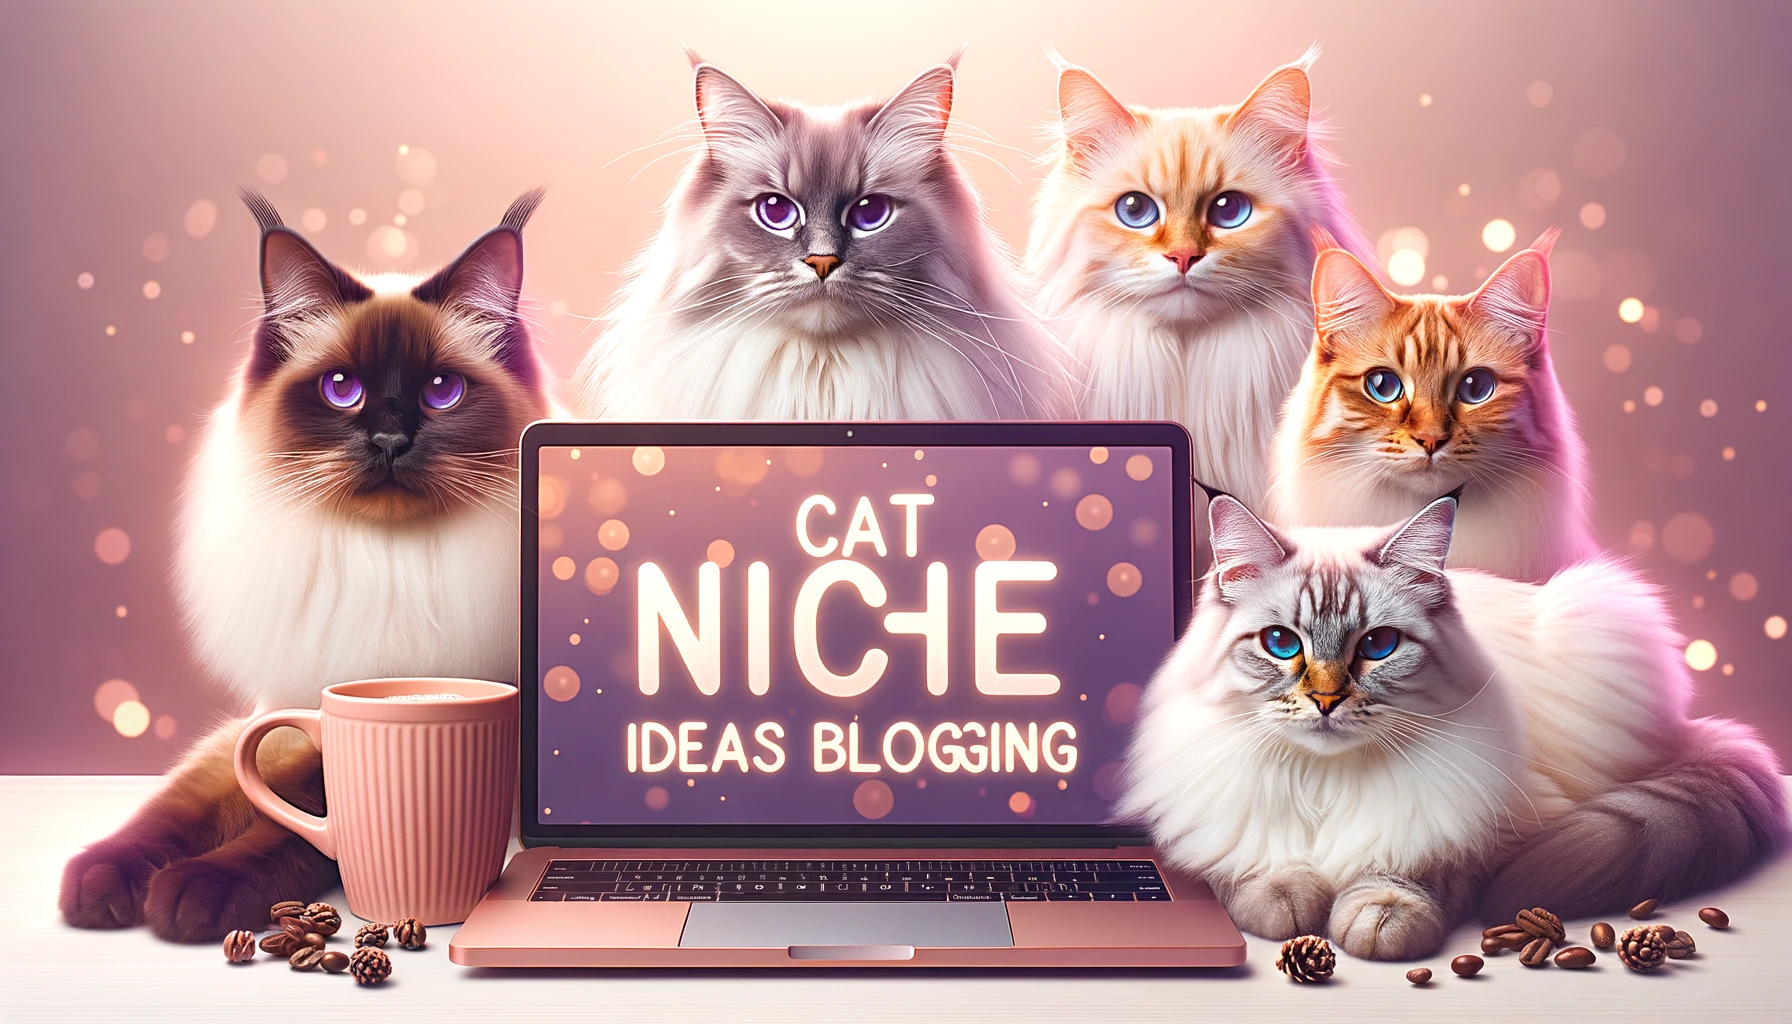 Cat niches for blogging